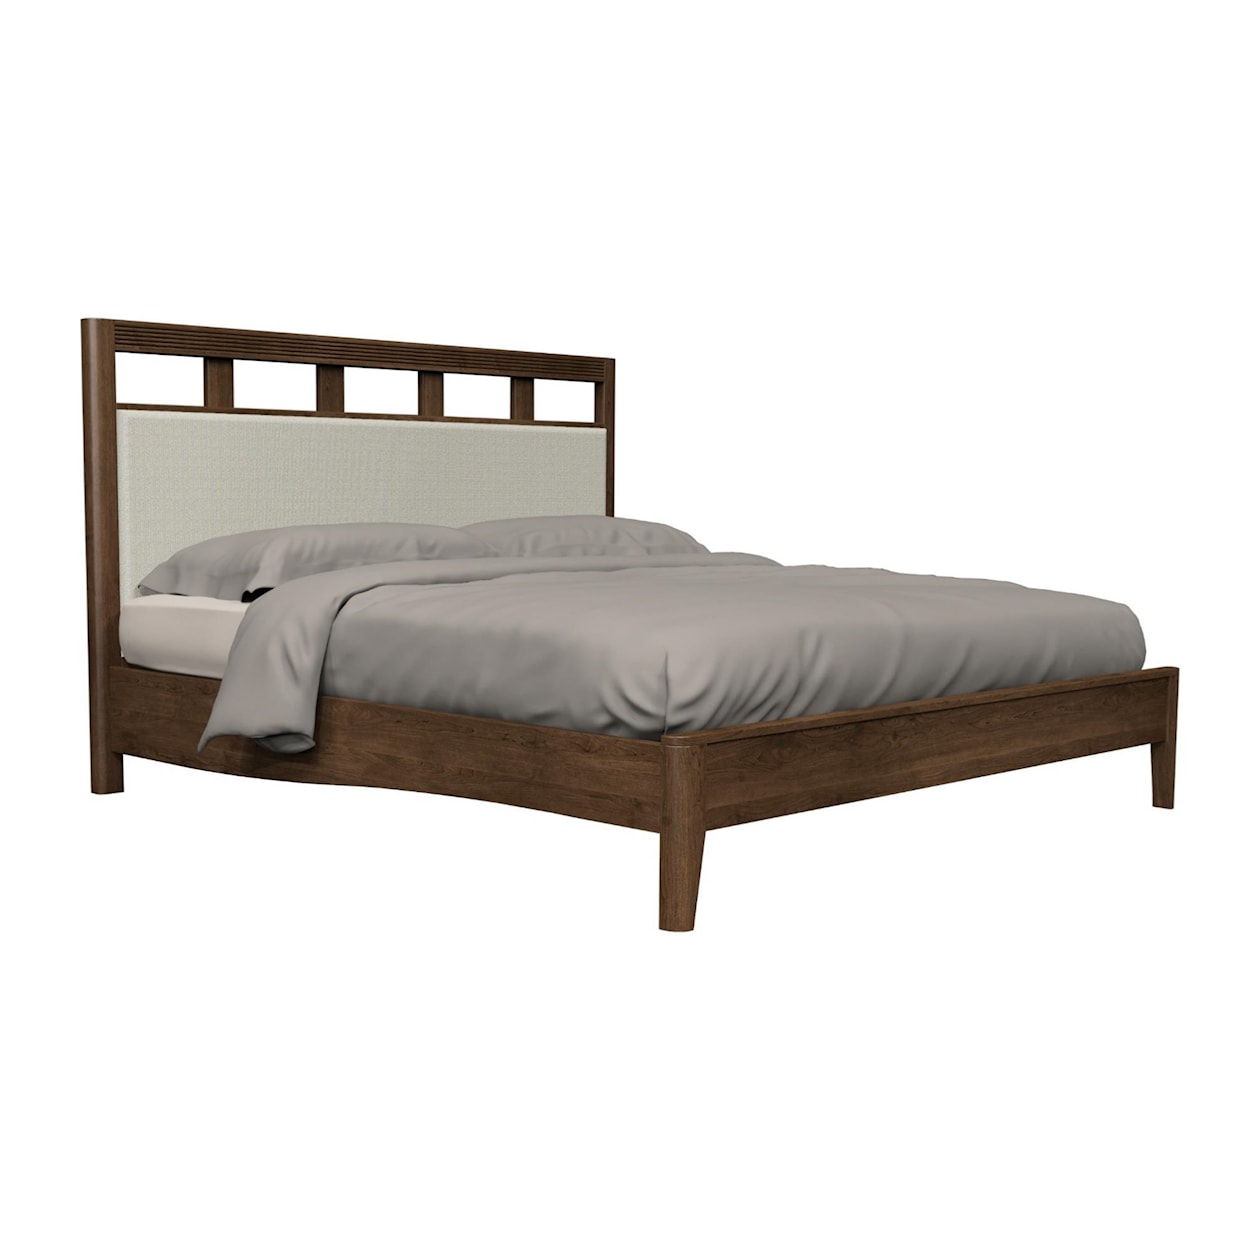 Country View Woodworking Westwood Bedroom California King Bed